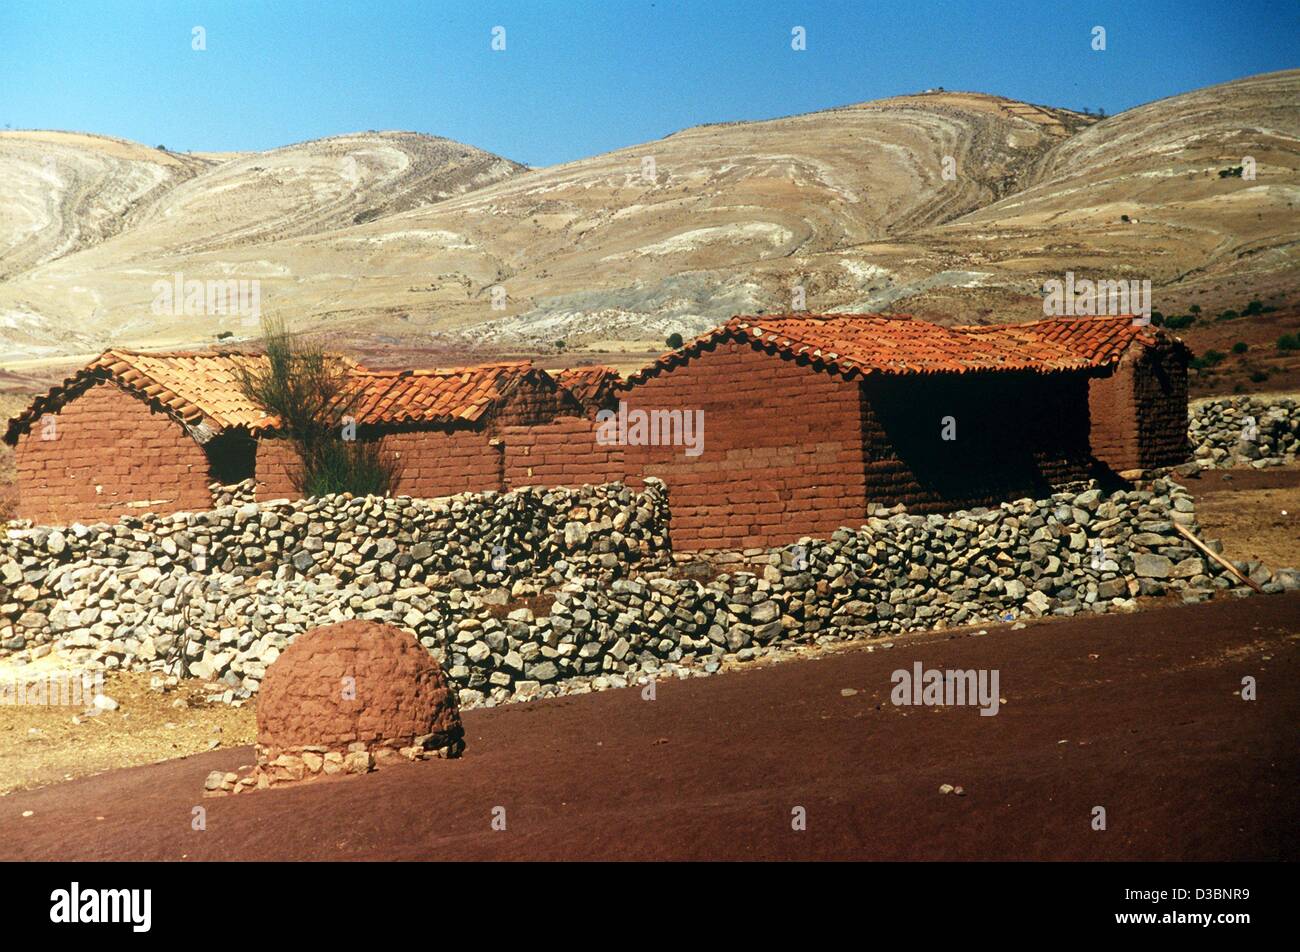 (dpa files) - A view of a farm in the village of Maragua, near Sucre, Bolivia, 2002. Although Bolivia is rich in natural ressources, it is one of the poorest countries in Latin America. Stock Photo